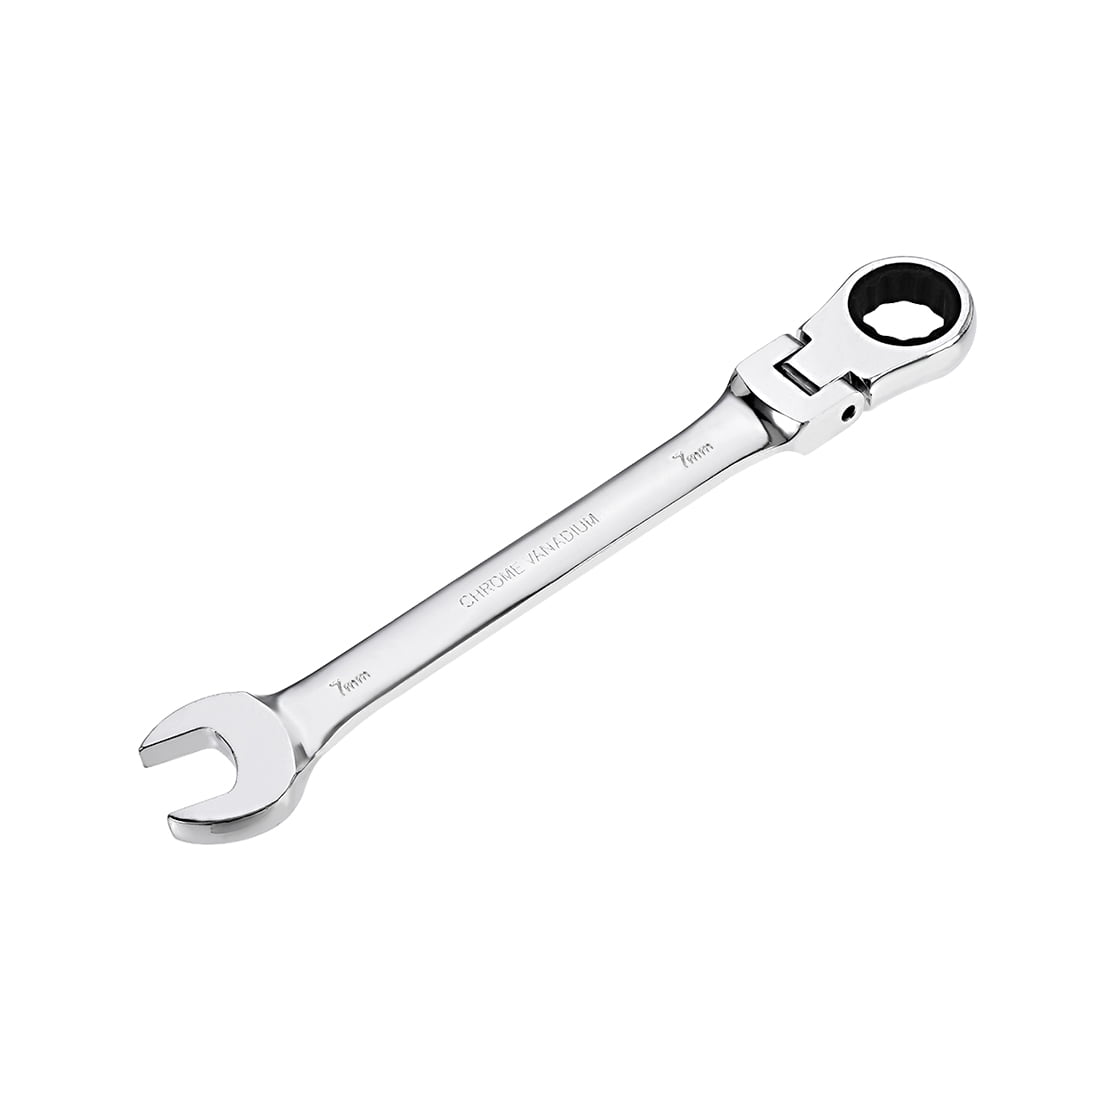 uxcell 17mm Metric L Shaped Angled Open Hex 6 point Socket Wrench 